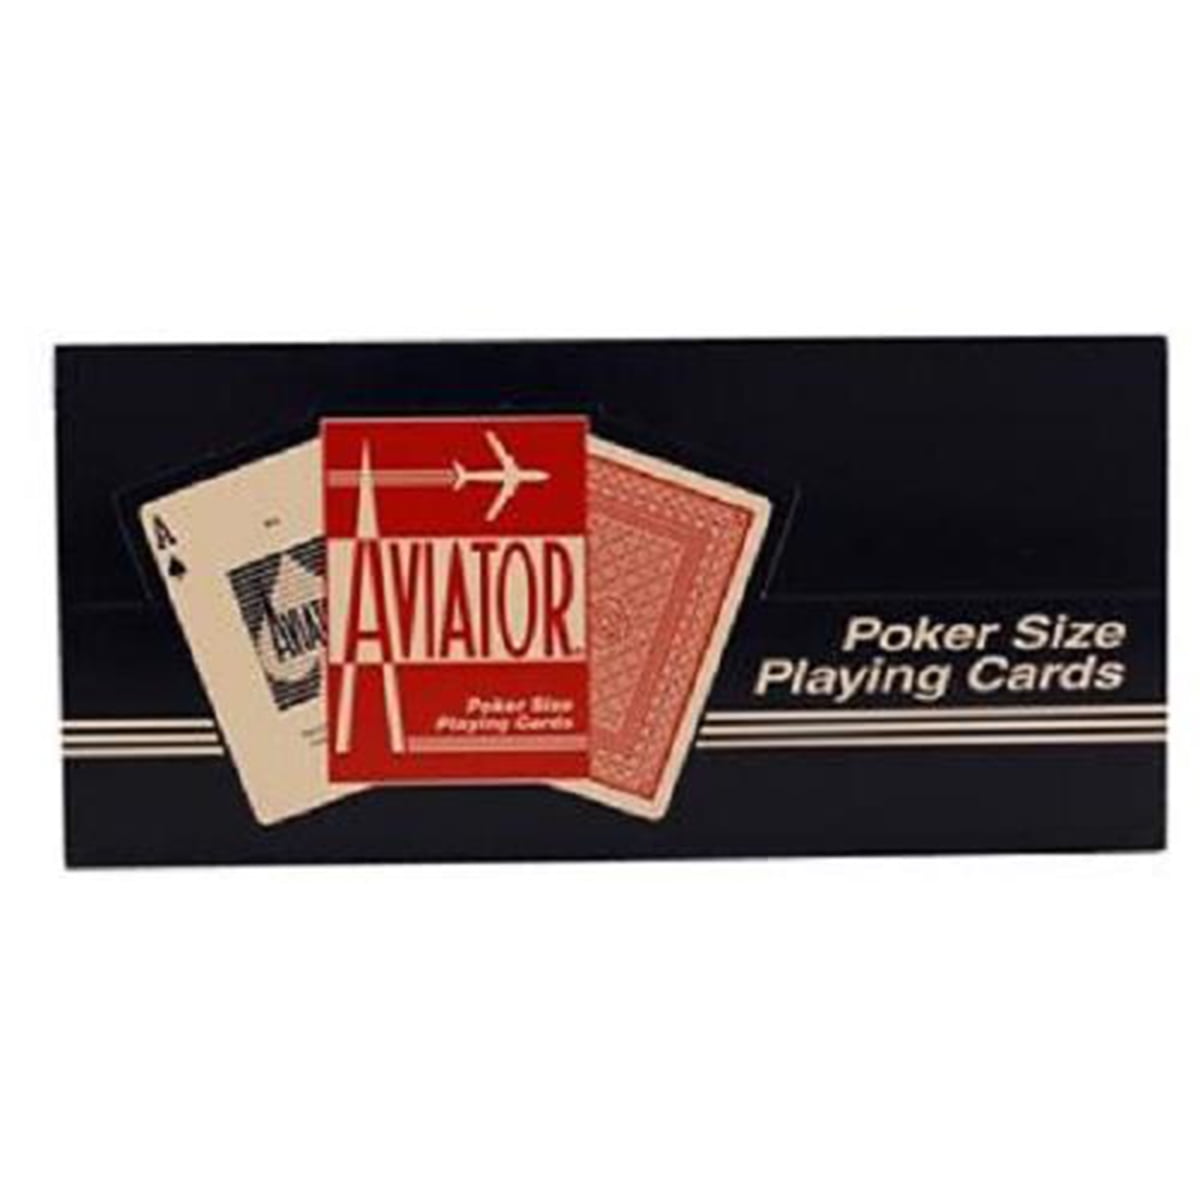 Aviator Standard Index Playing Cards - 1 Sealed Red Deck and 1 